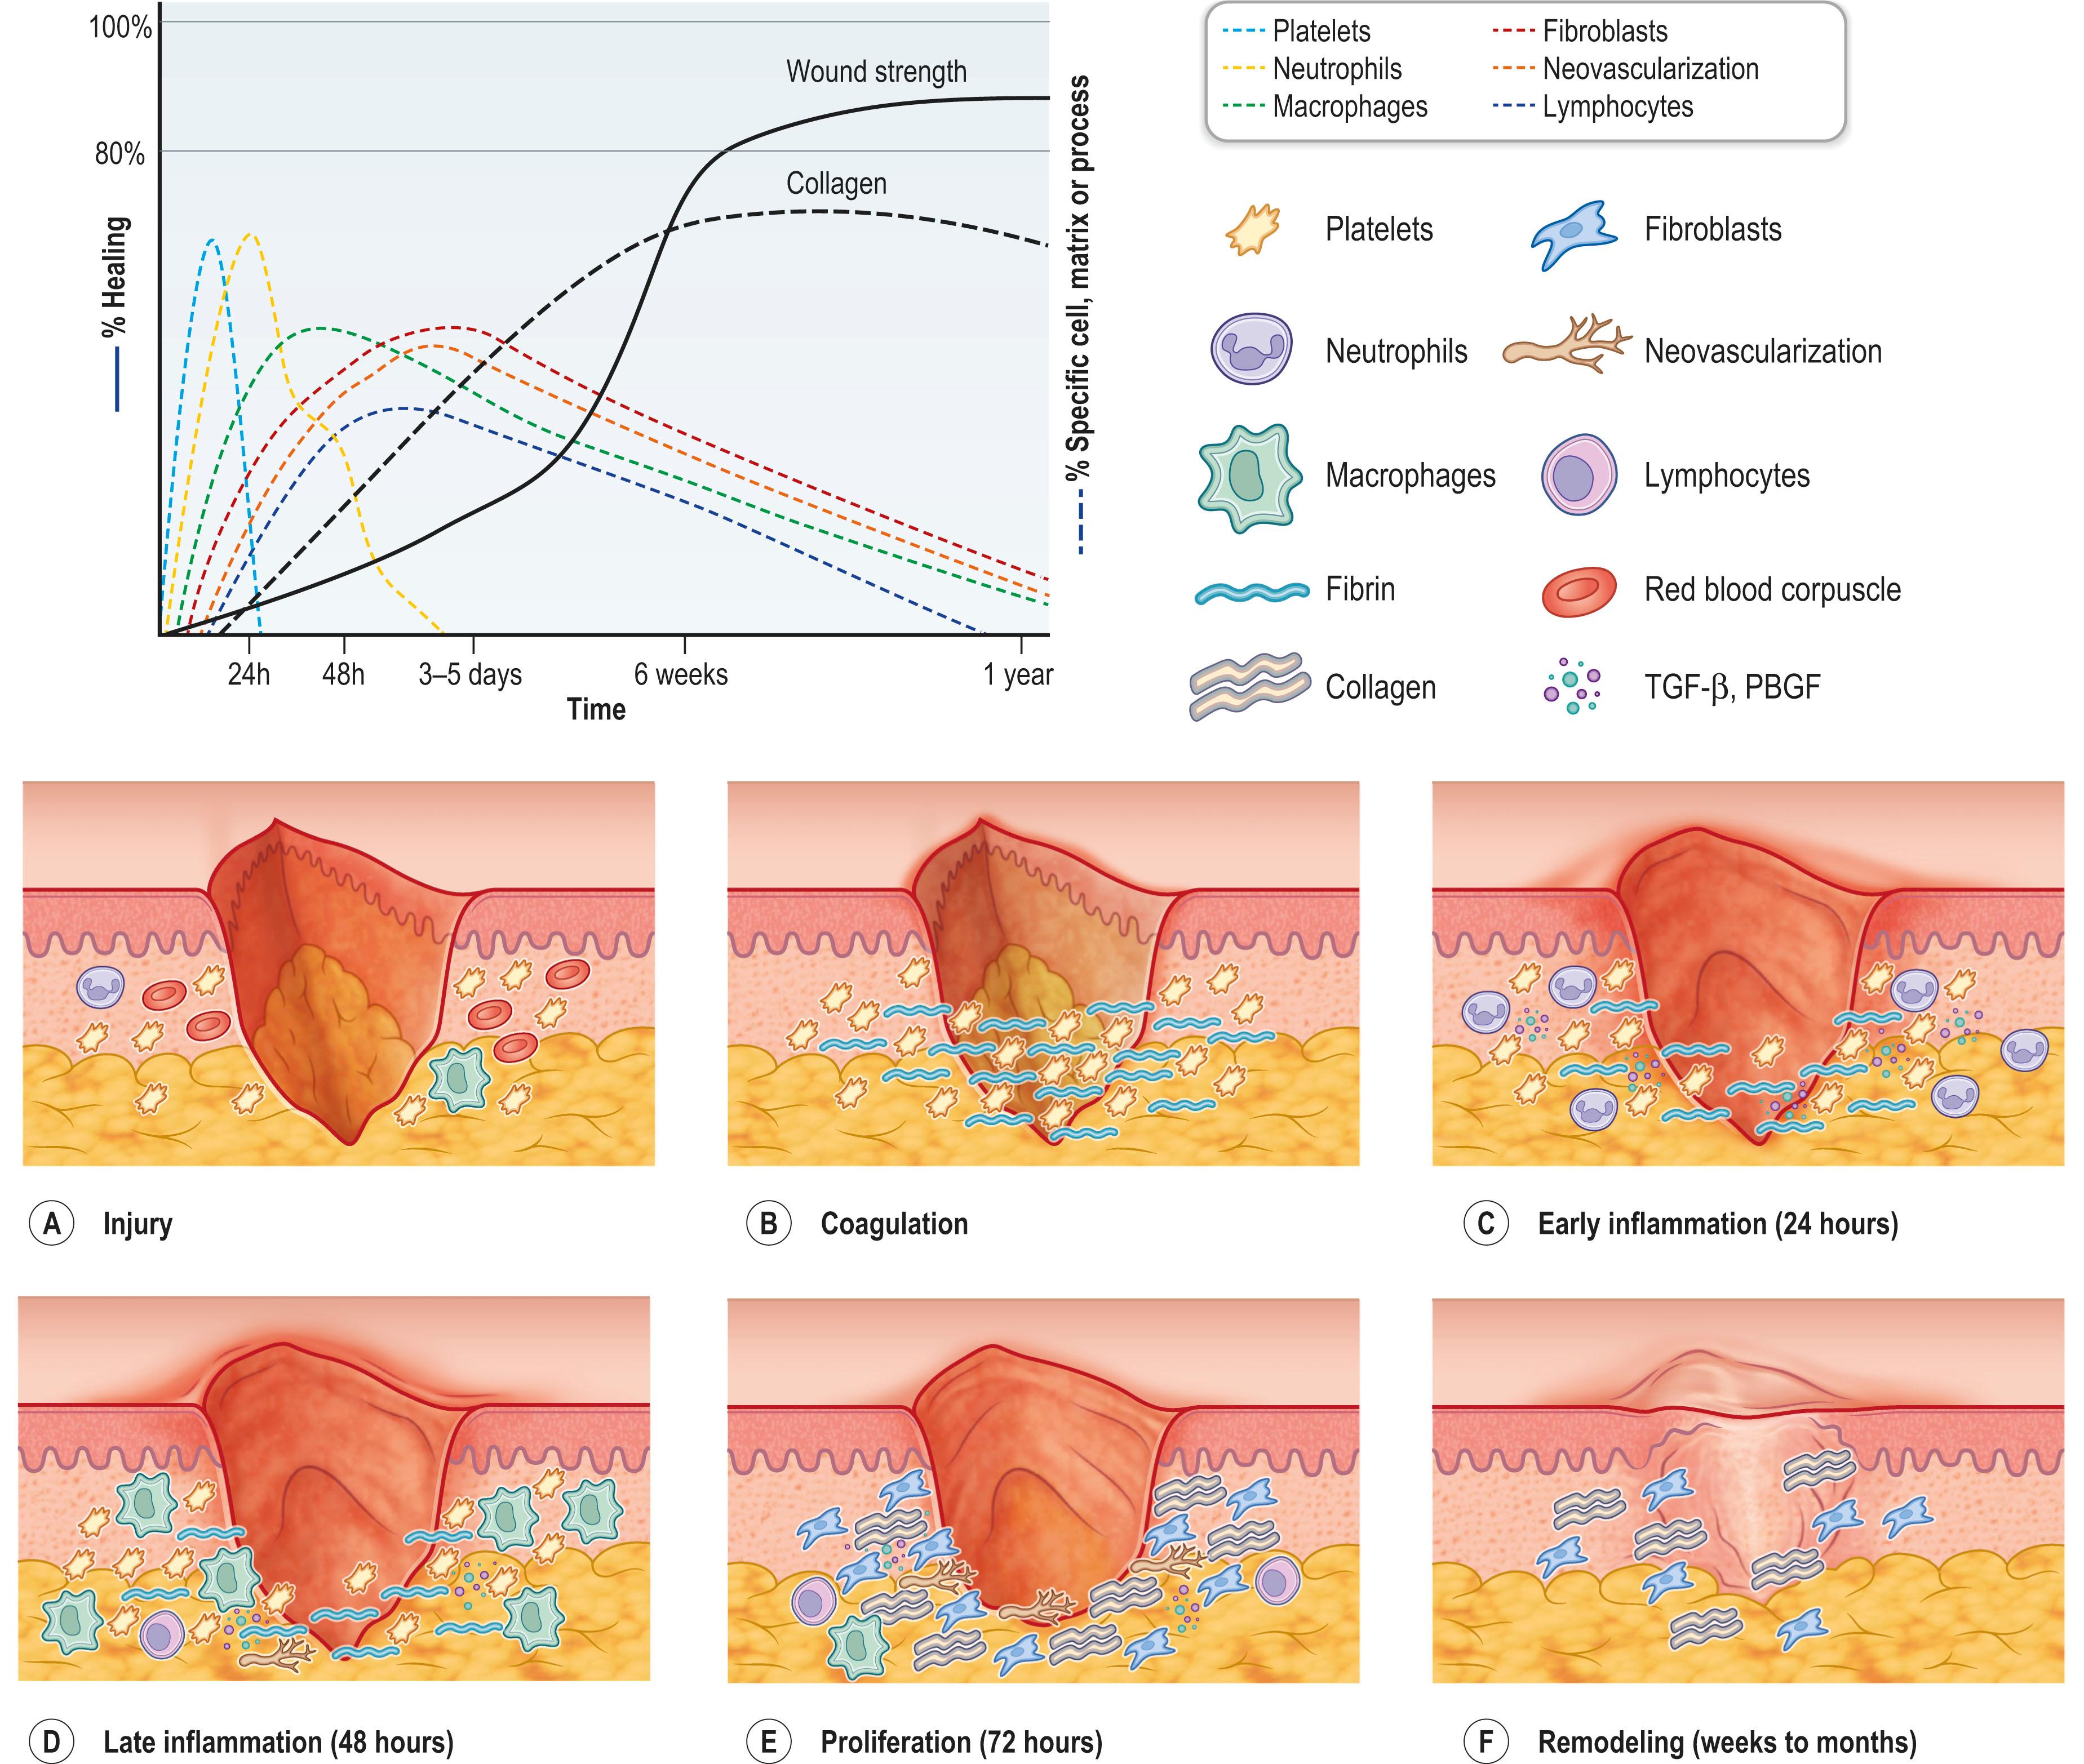 Figure 16.1, (A–F) Phases of wound healing. Wounds progress through inflammation, proliferation, and finally remodeling. Chart shows how the different cell populations within a wound contribute to skin repair over time. PDGF, Platelet-derived growth factor; TGF-β, transforming growth factor-beta.